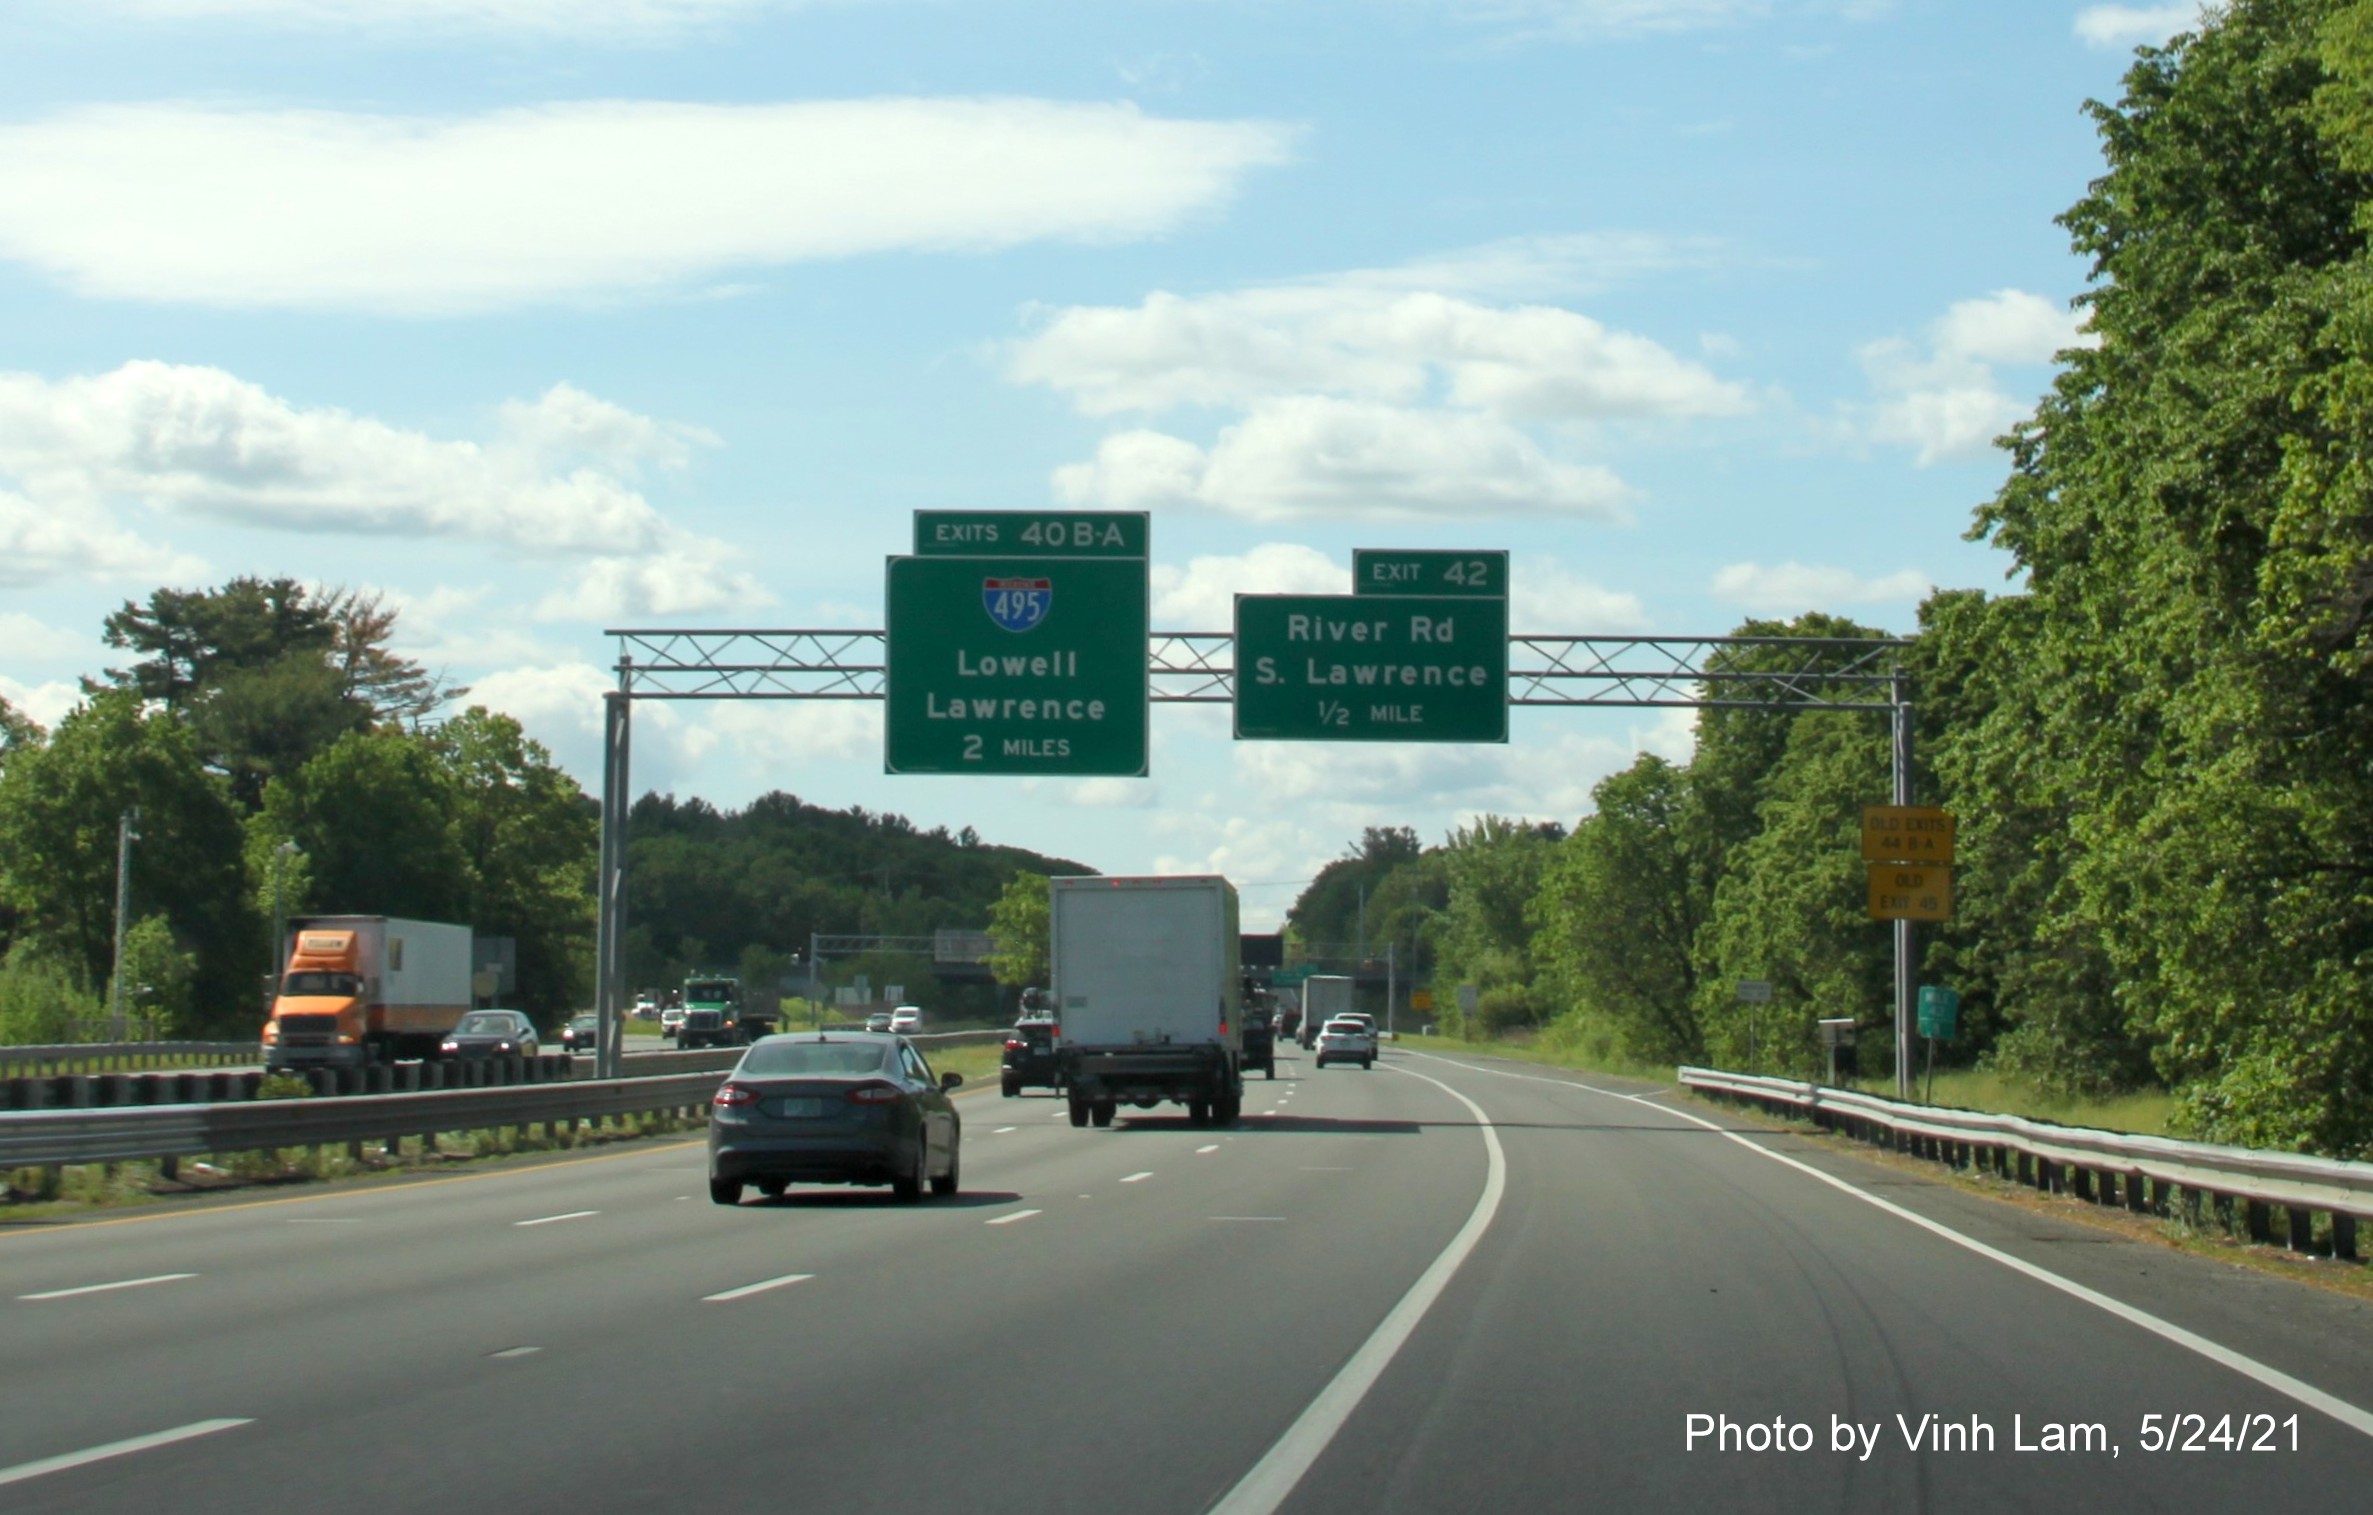 Image of 2 miles advance sign for I-495 exits with new milepost based exit numbers and yellow Old Exits 44 B-A advisory sign on right support on I-93 South in Andover, by Vinh Lam, May 2021